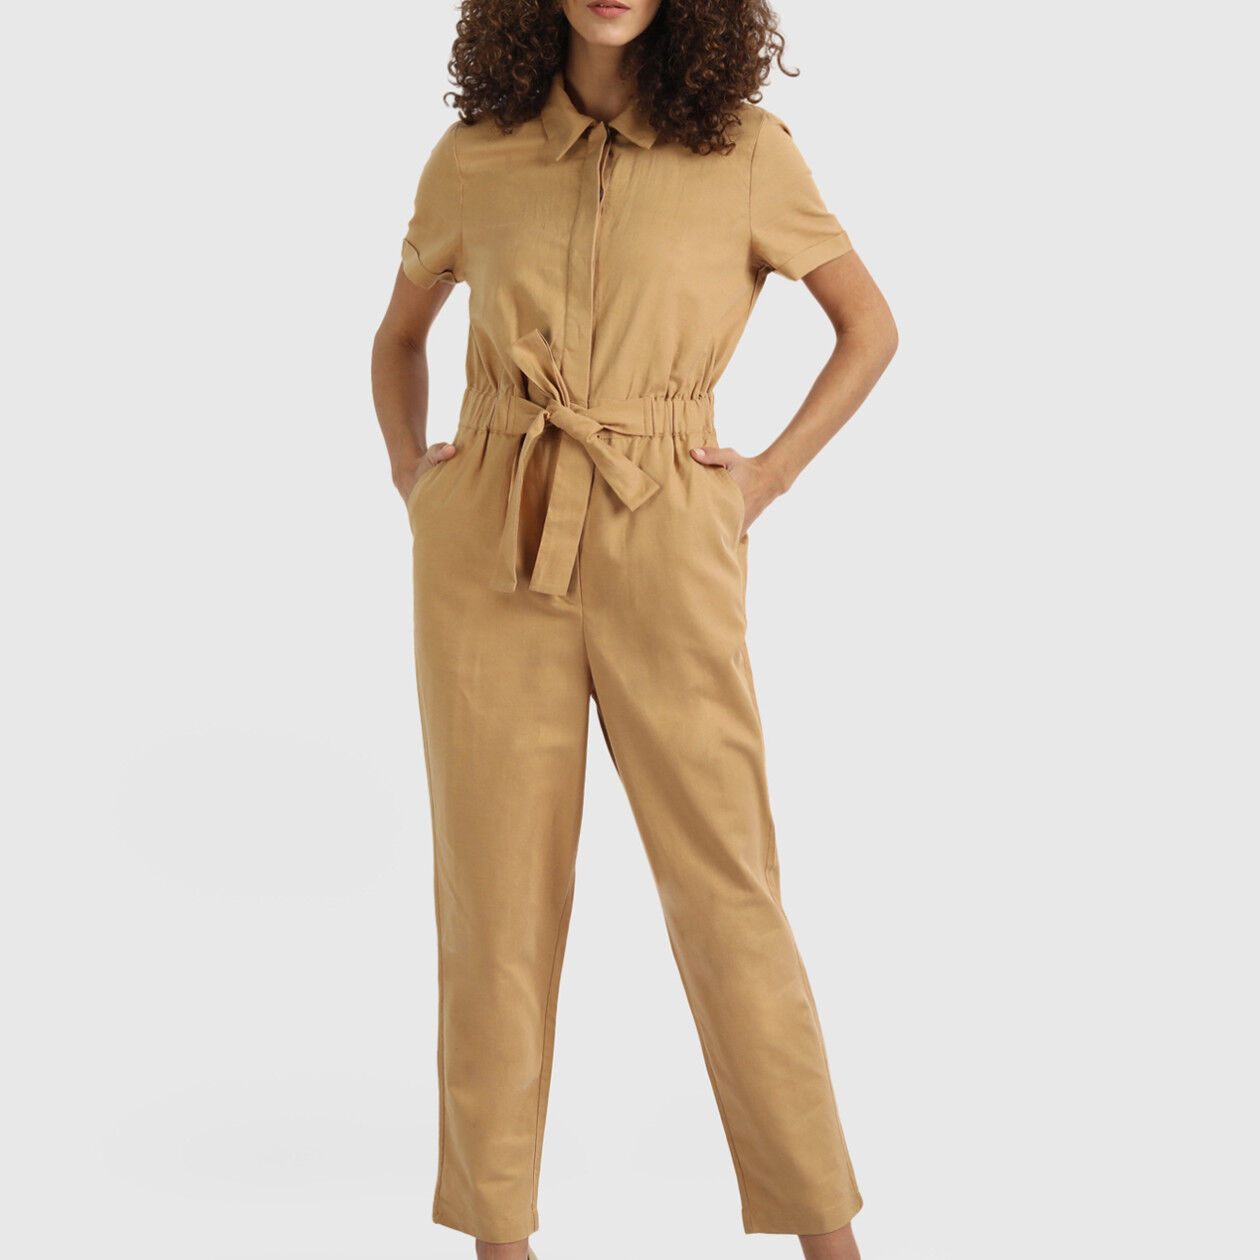 Buy AND Lilac Solid Cotton Straight Fit Women's Jumpsuit | Shoppers Stop